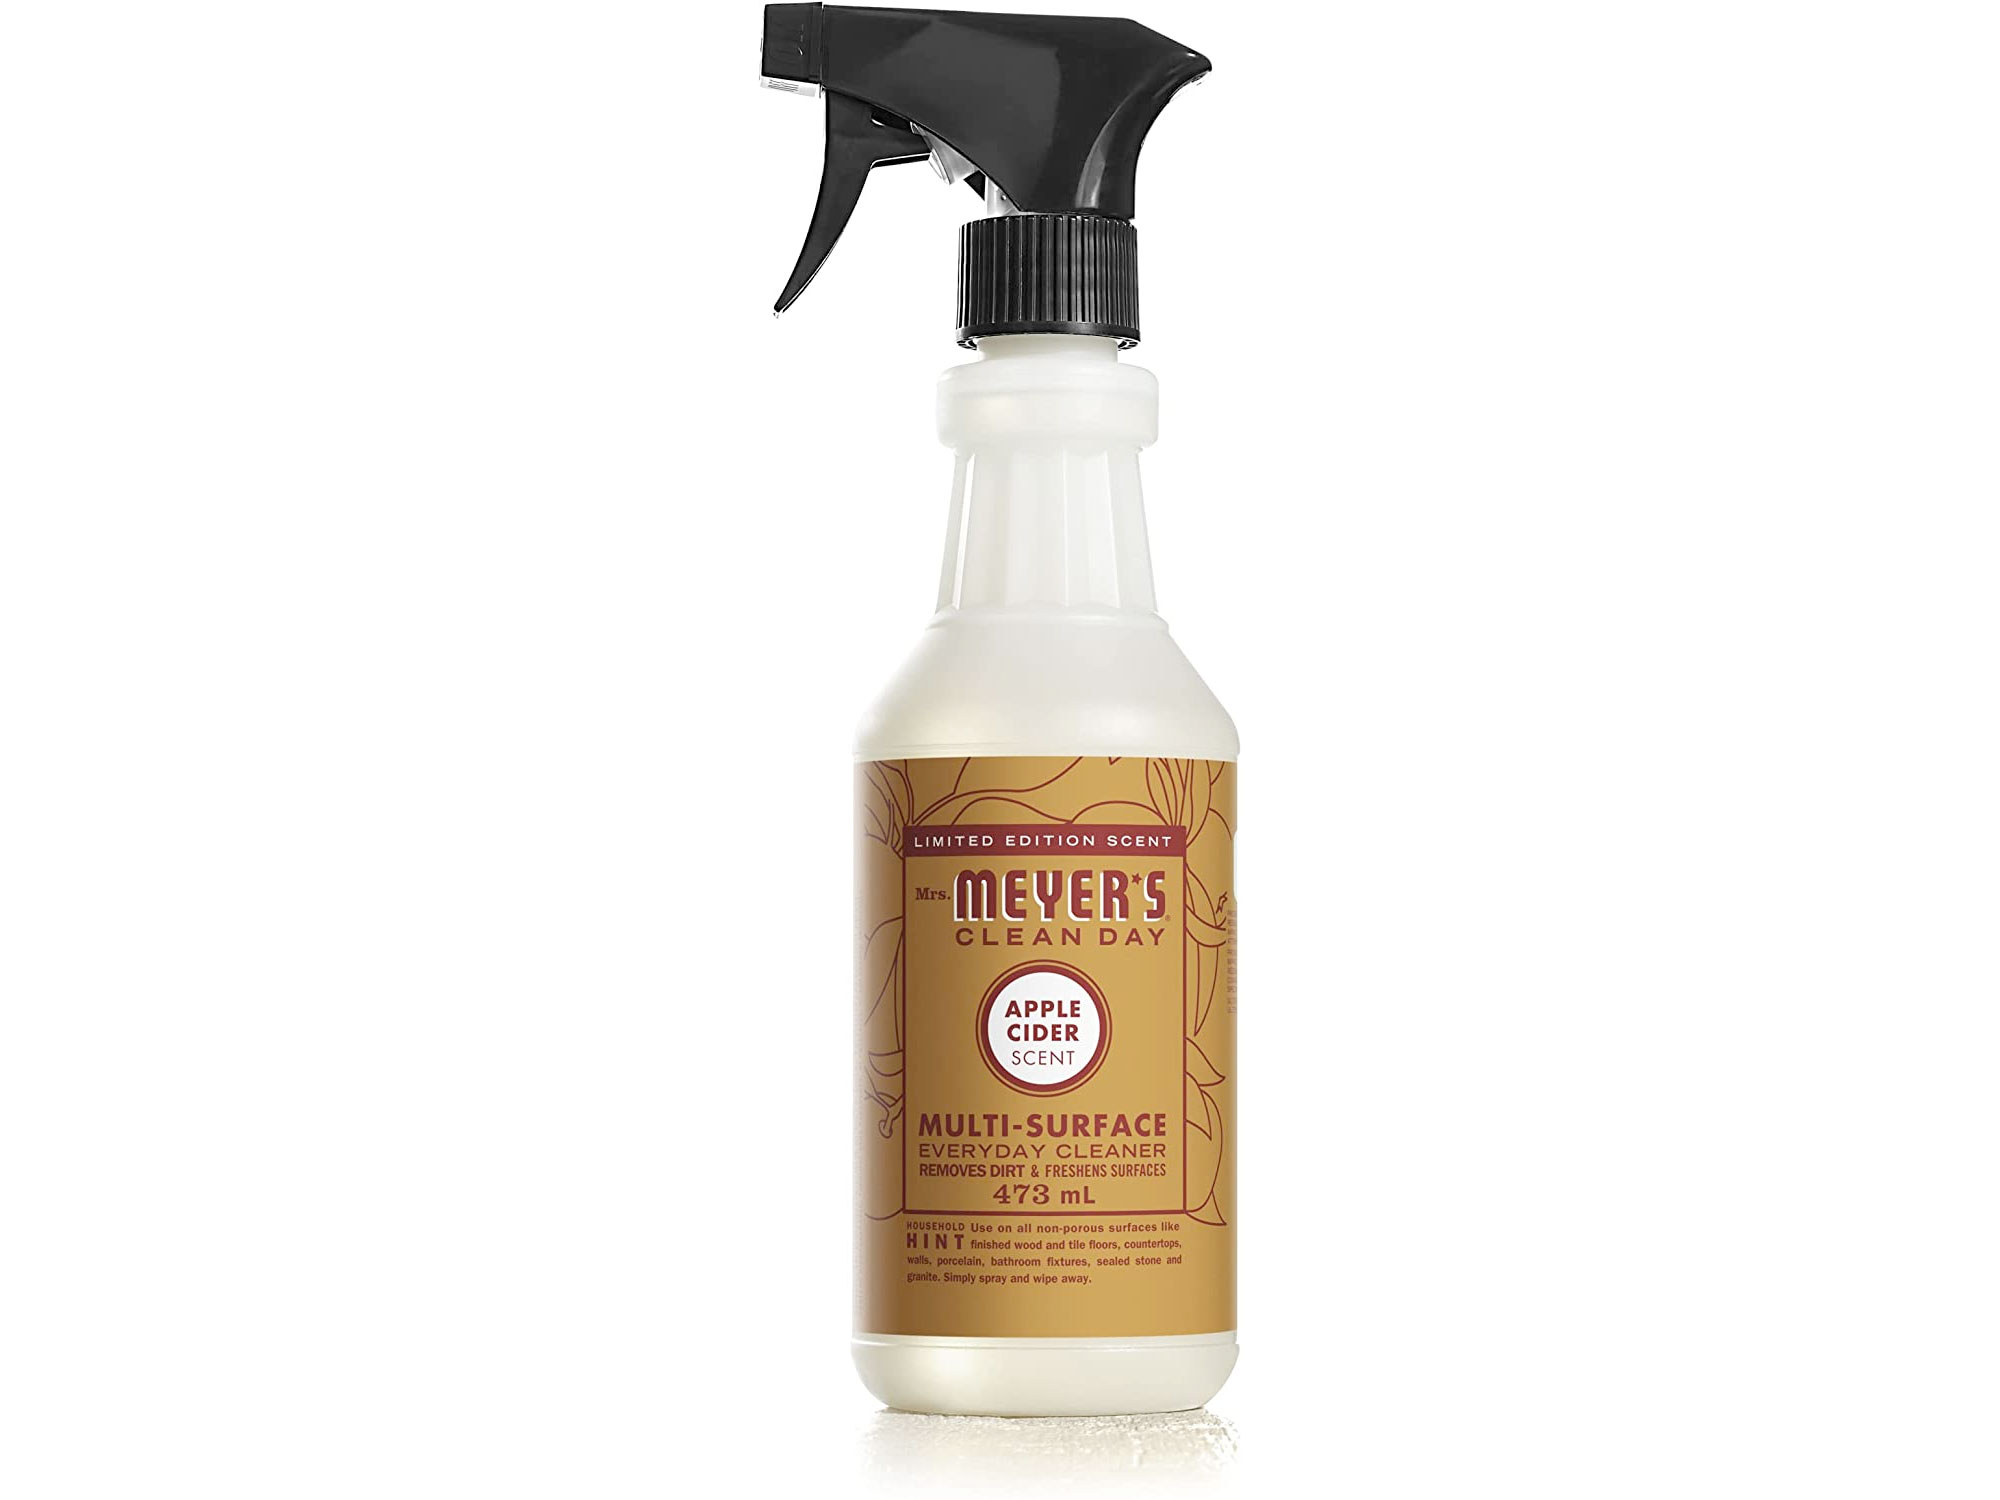 Amazon：Mrs. Meyer’s Clean Day Multi-Surface Cleaner Spray (473ml)只卖$3.50